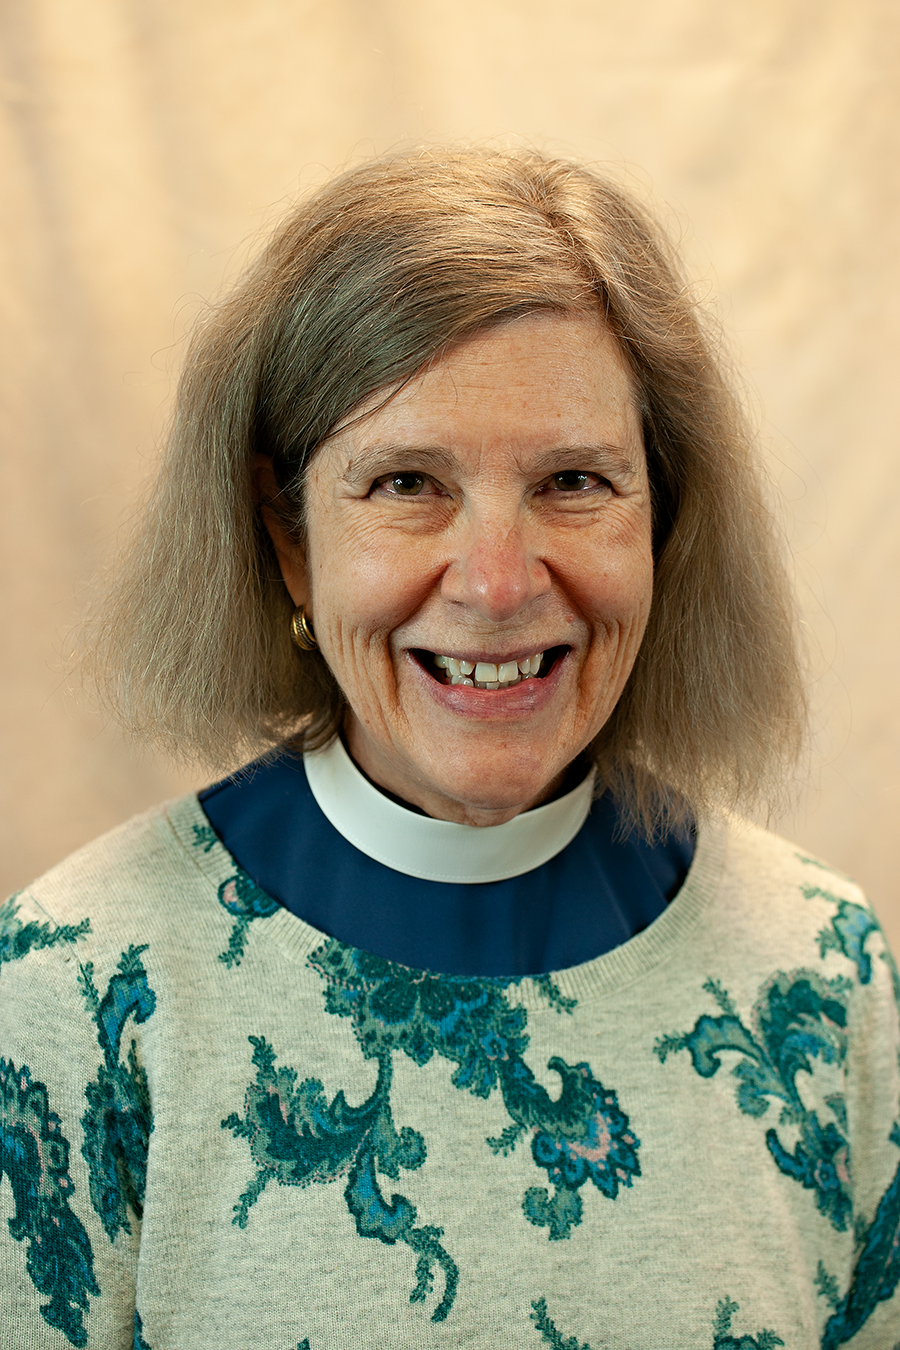 Rev. Dr. Sidnie White-Crawford, wearing a priest's collar and a floral sweater. She is smiling.